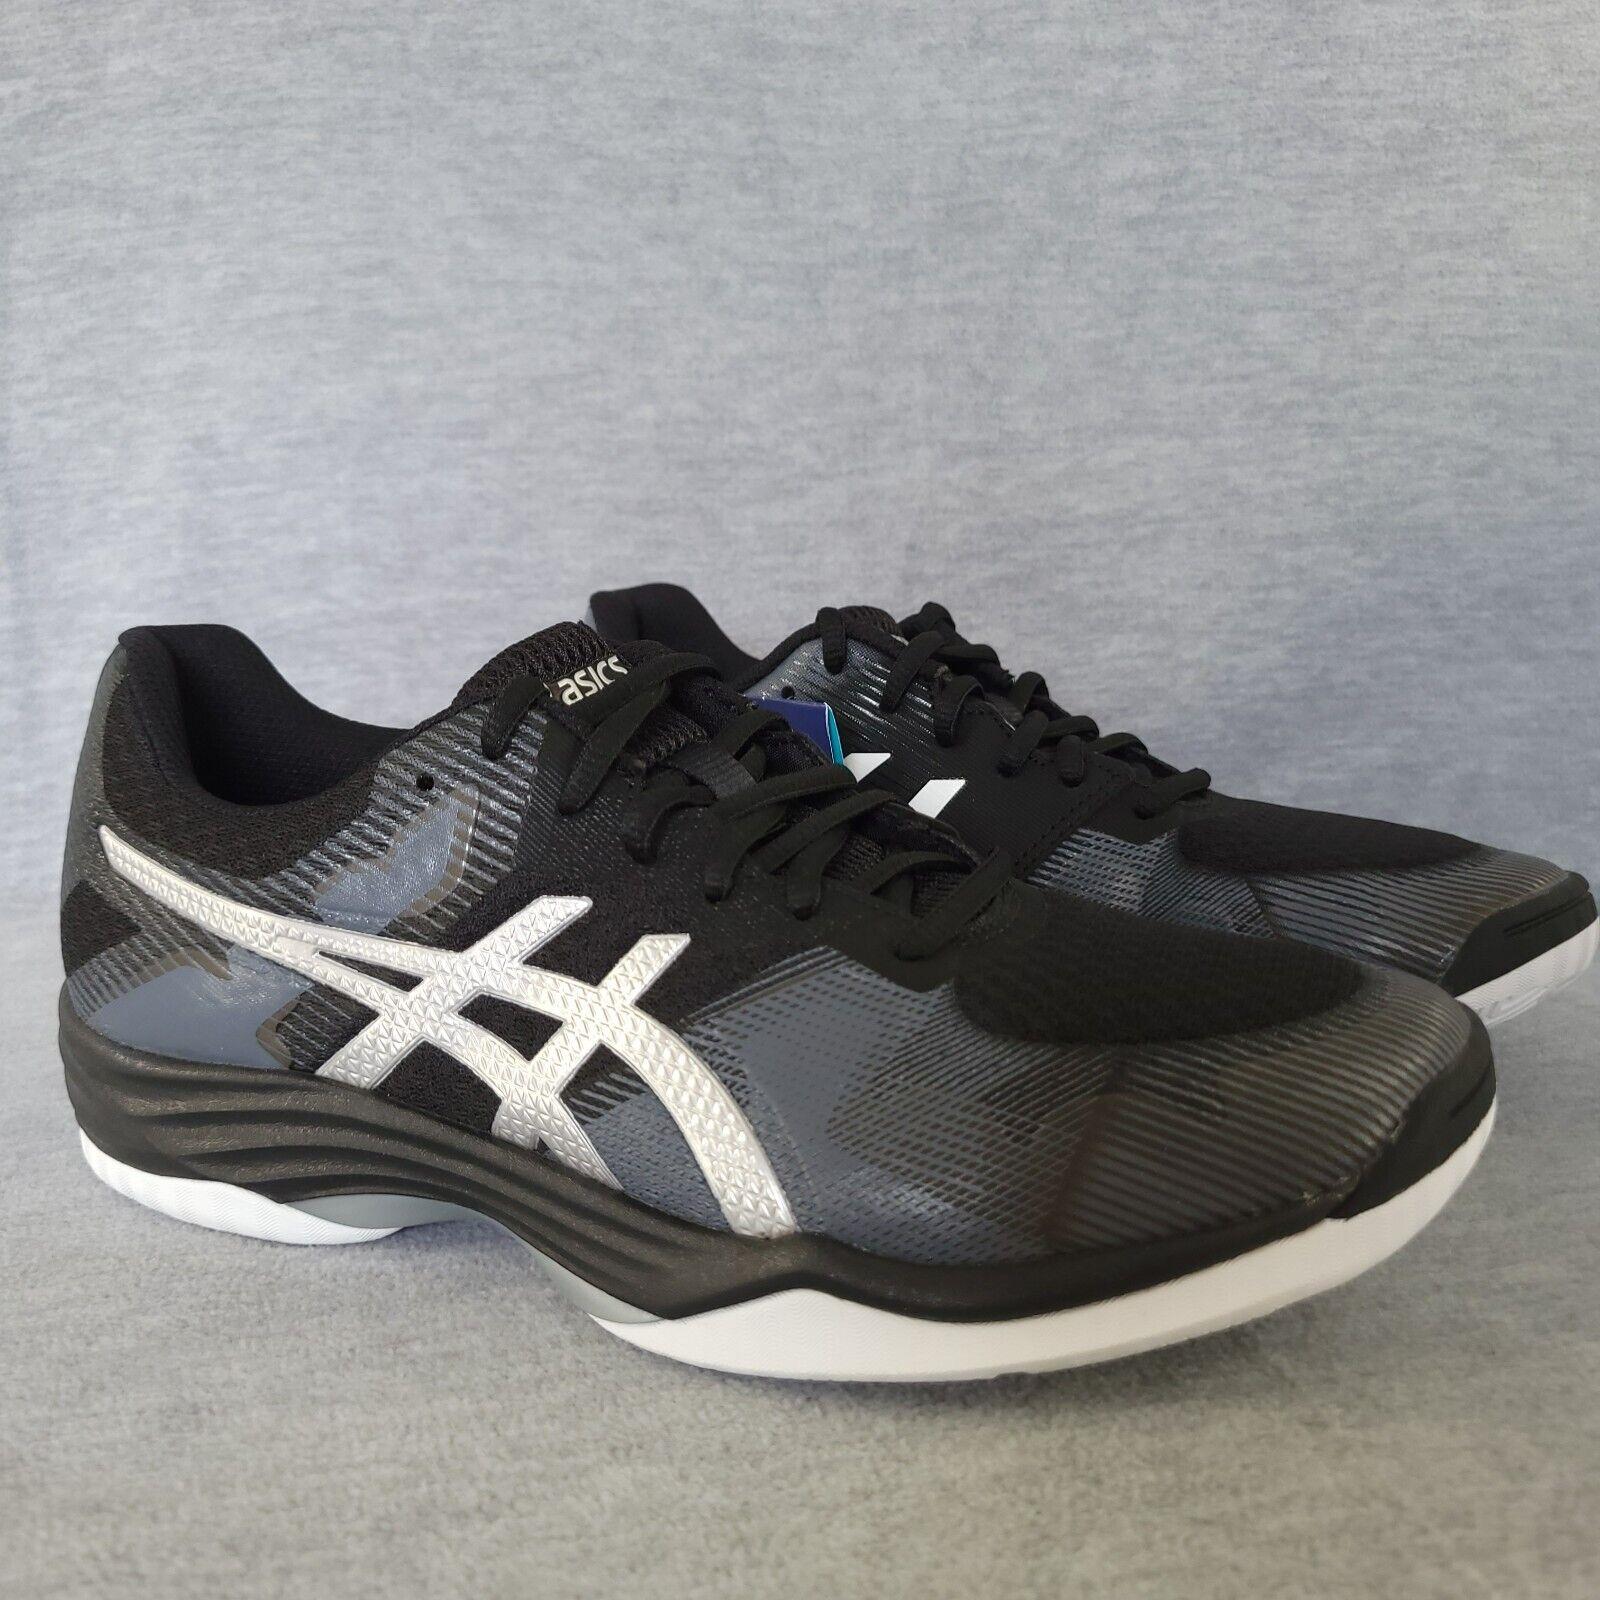 Asics Shoes Womens 9.5 Black Silver Gel-tactic Sneakers Volleyball Shoes Trainer